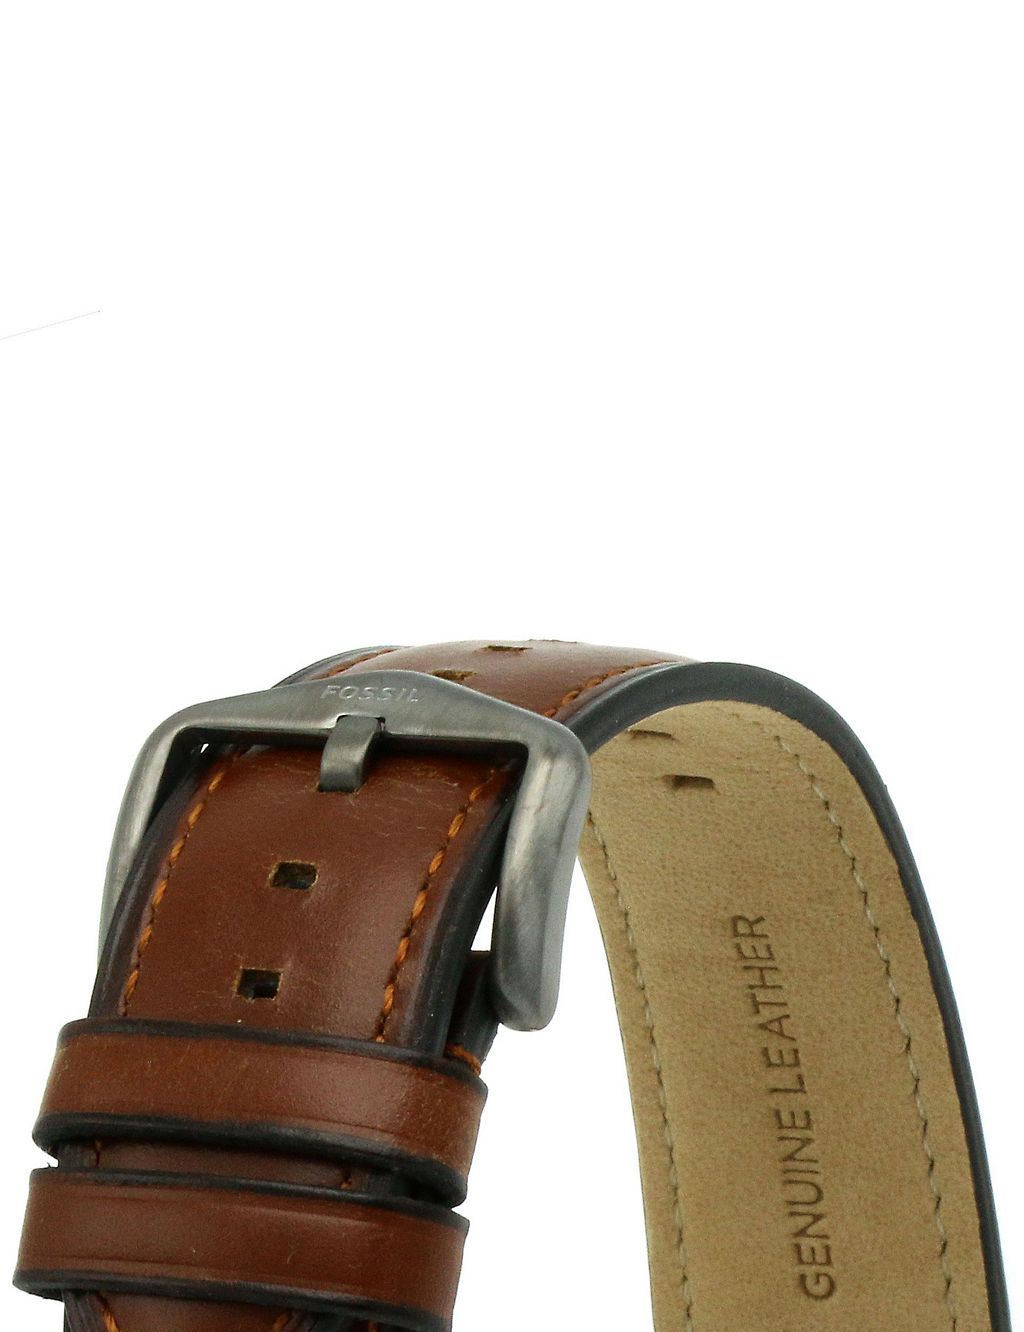 Fossil Townsman Brown Leather Watch 2 of 3